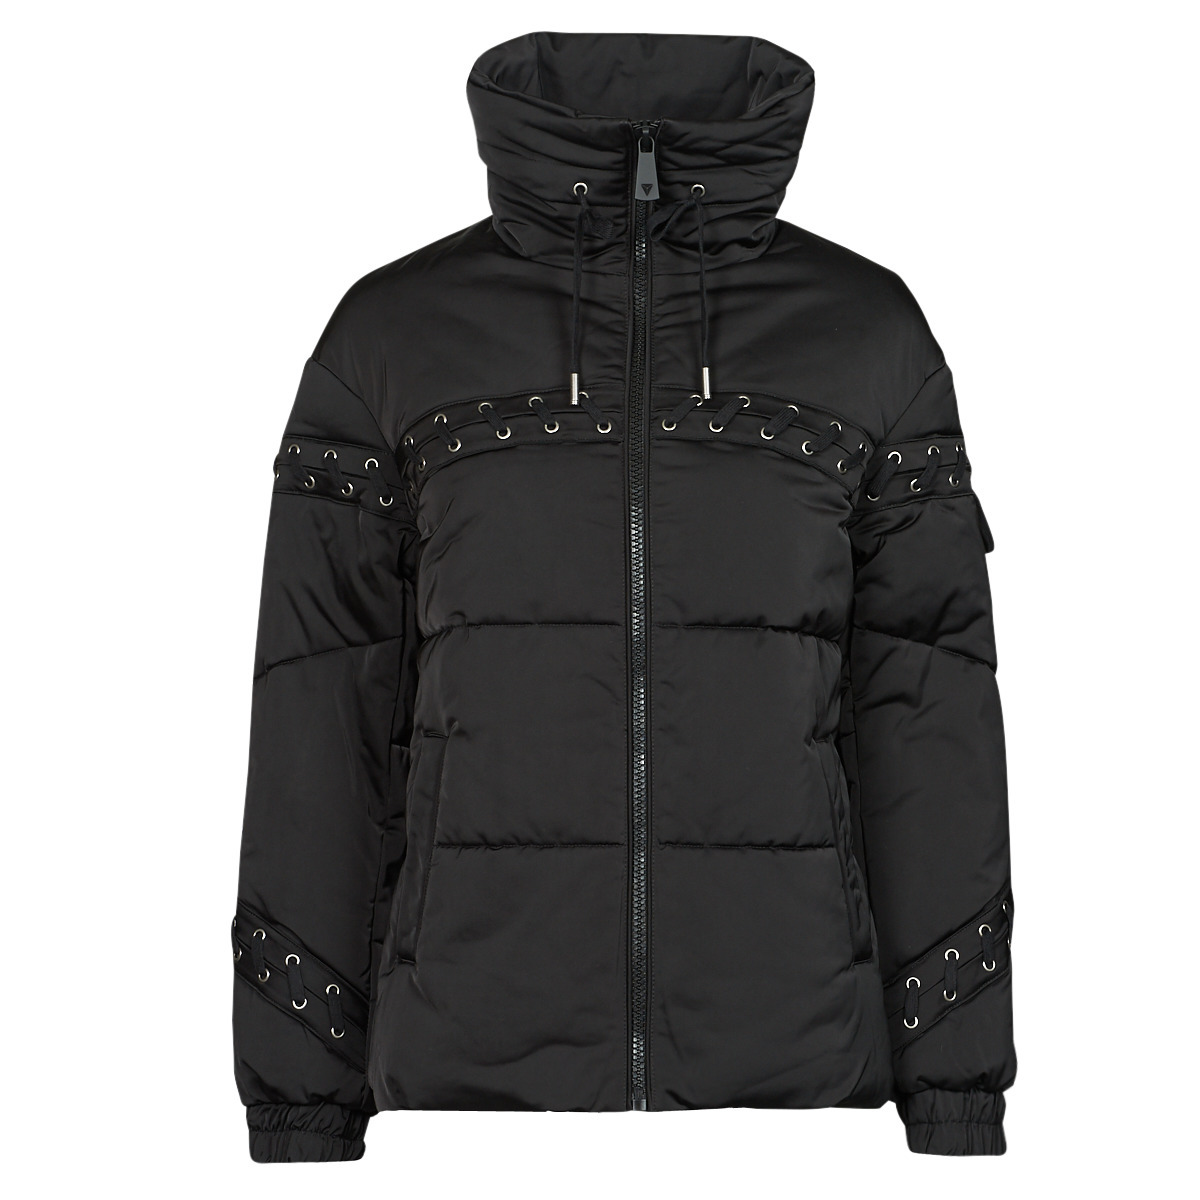 Spartoo Women Jacket in Black by Guess GOOFASH